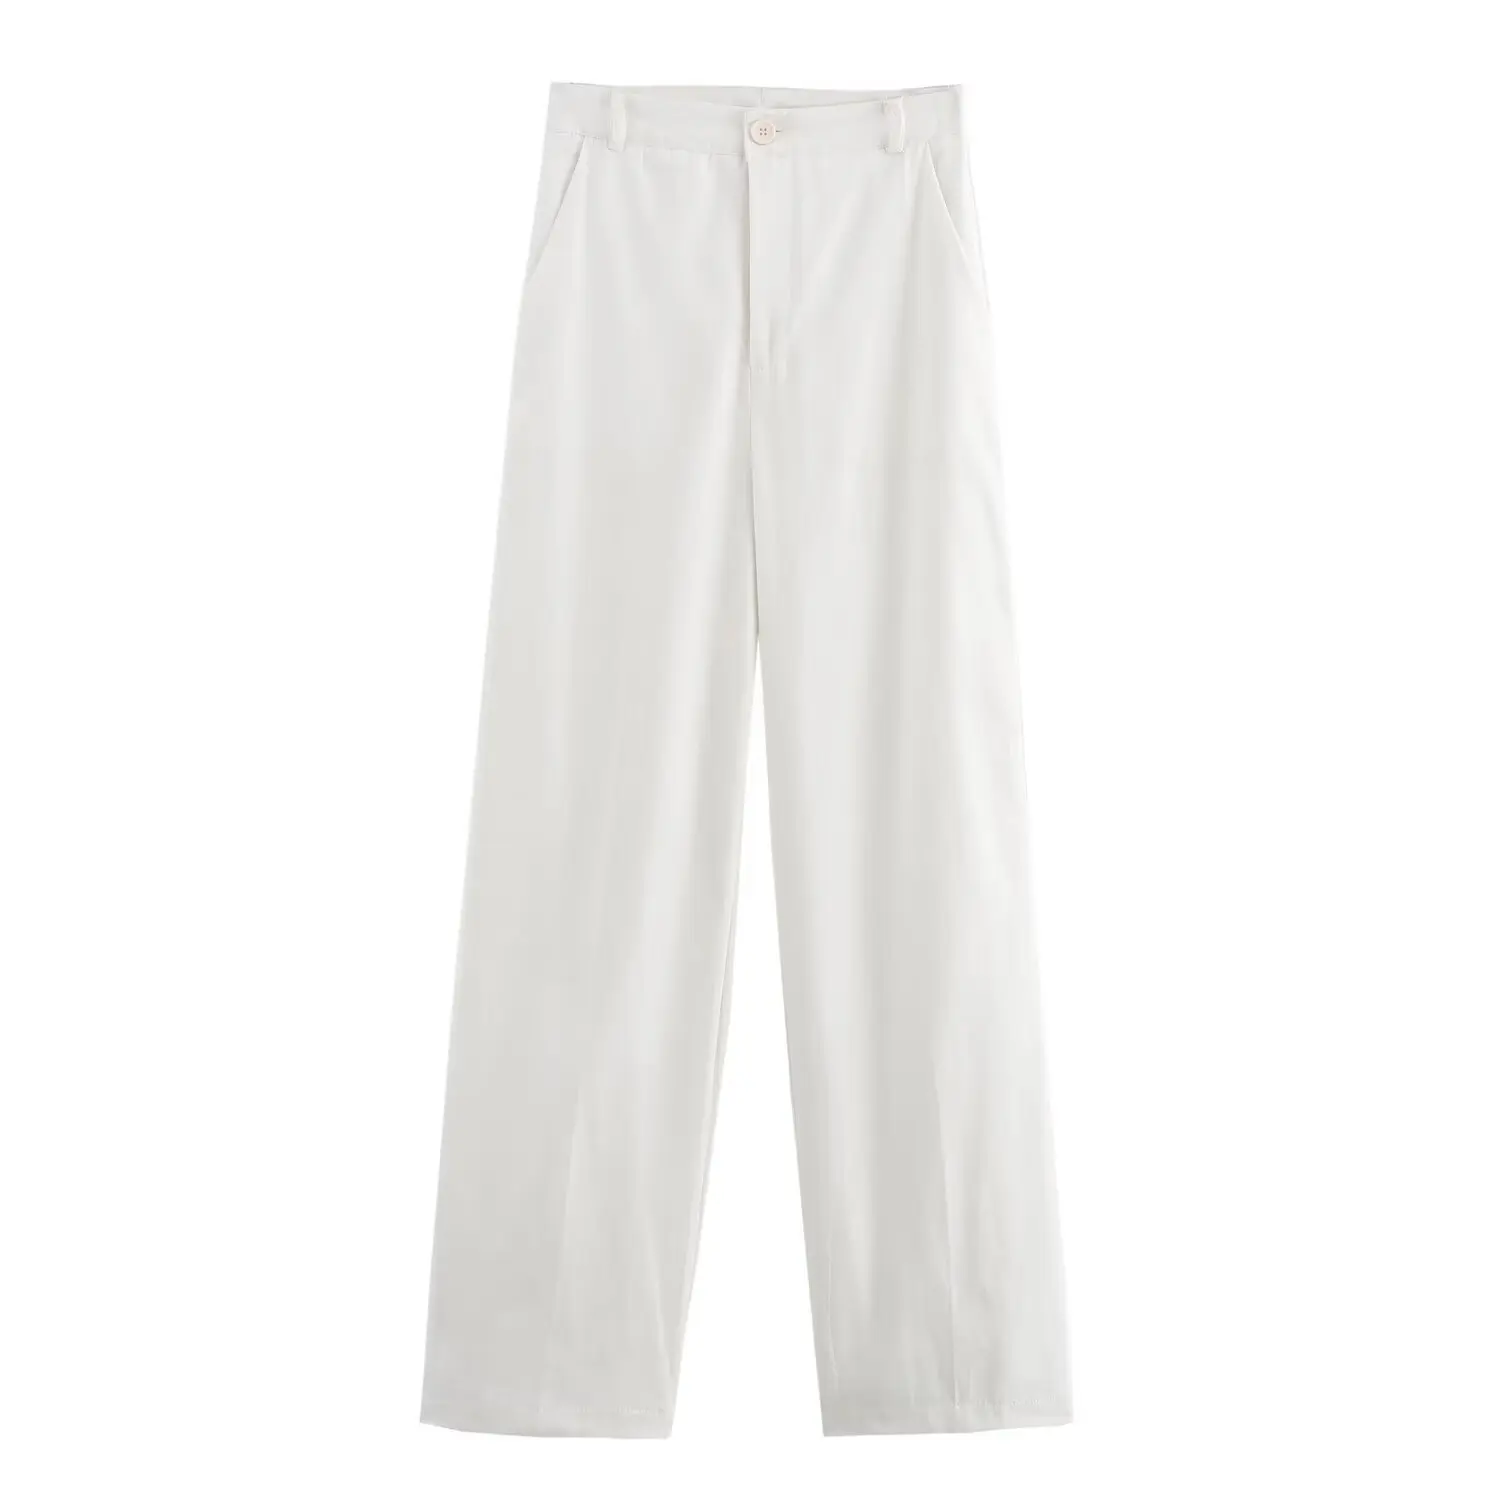 

TRAFZA Female Fashion Straught Pants White High Waist Pockets Button Zipper Trousers Summer Long Pants Woman Trendy TRAF